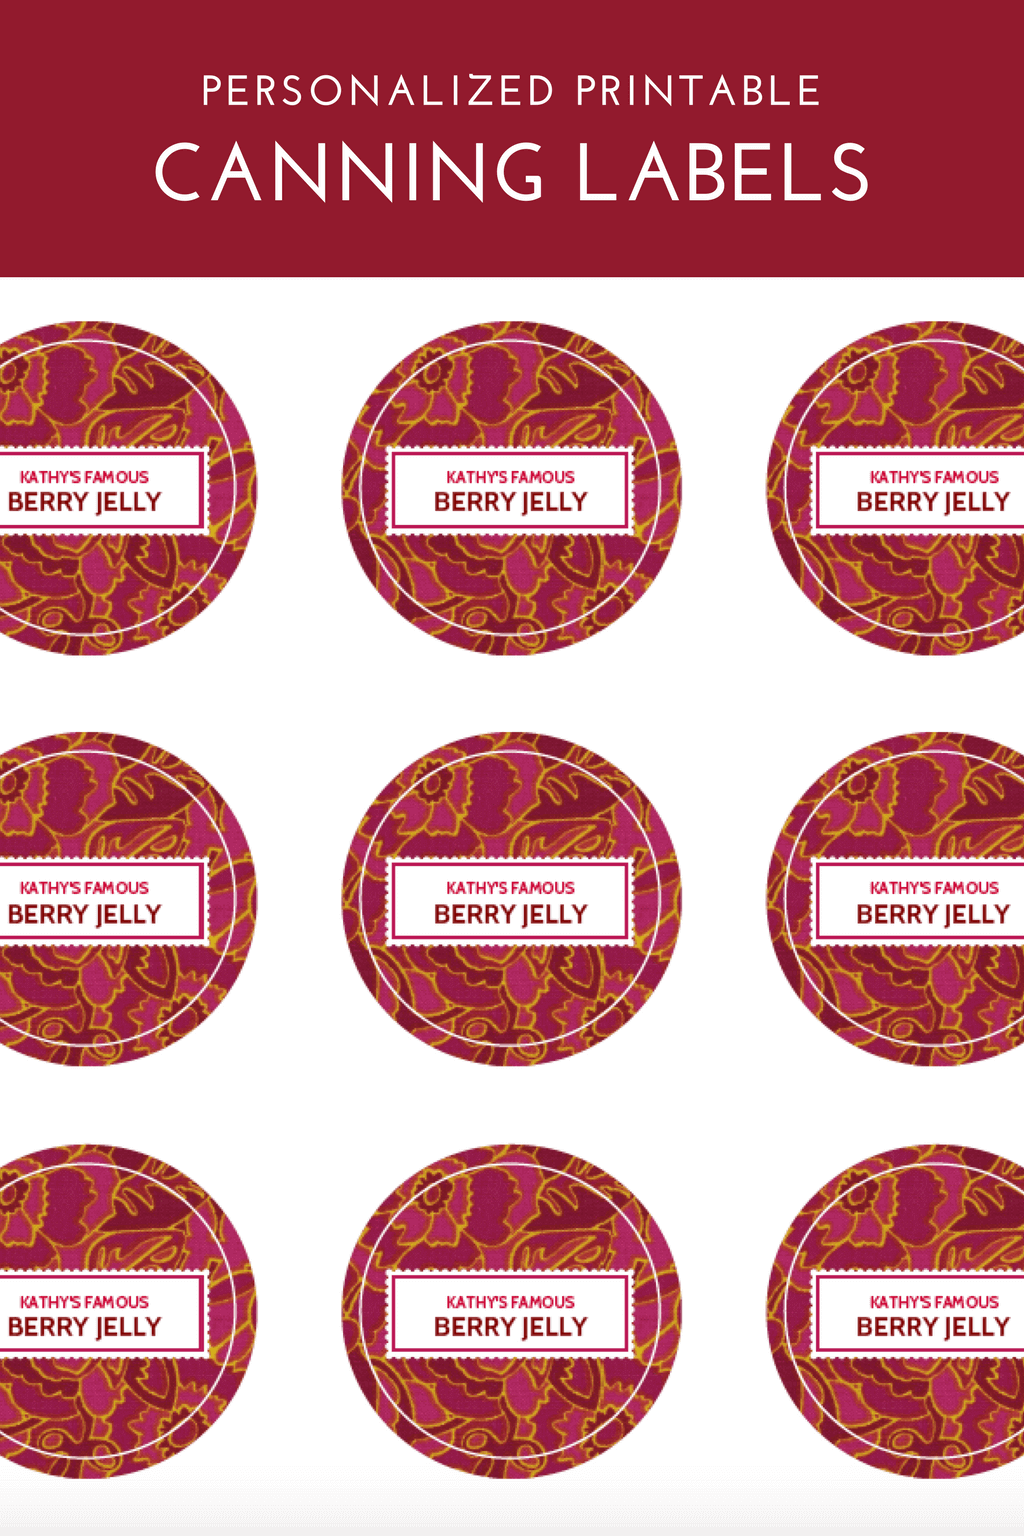 Canning Label Template In Five Cheery Colors Merriment Design